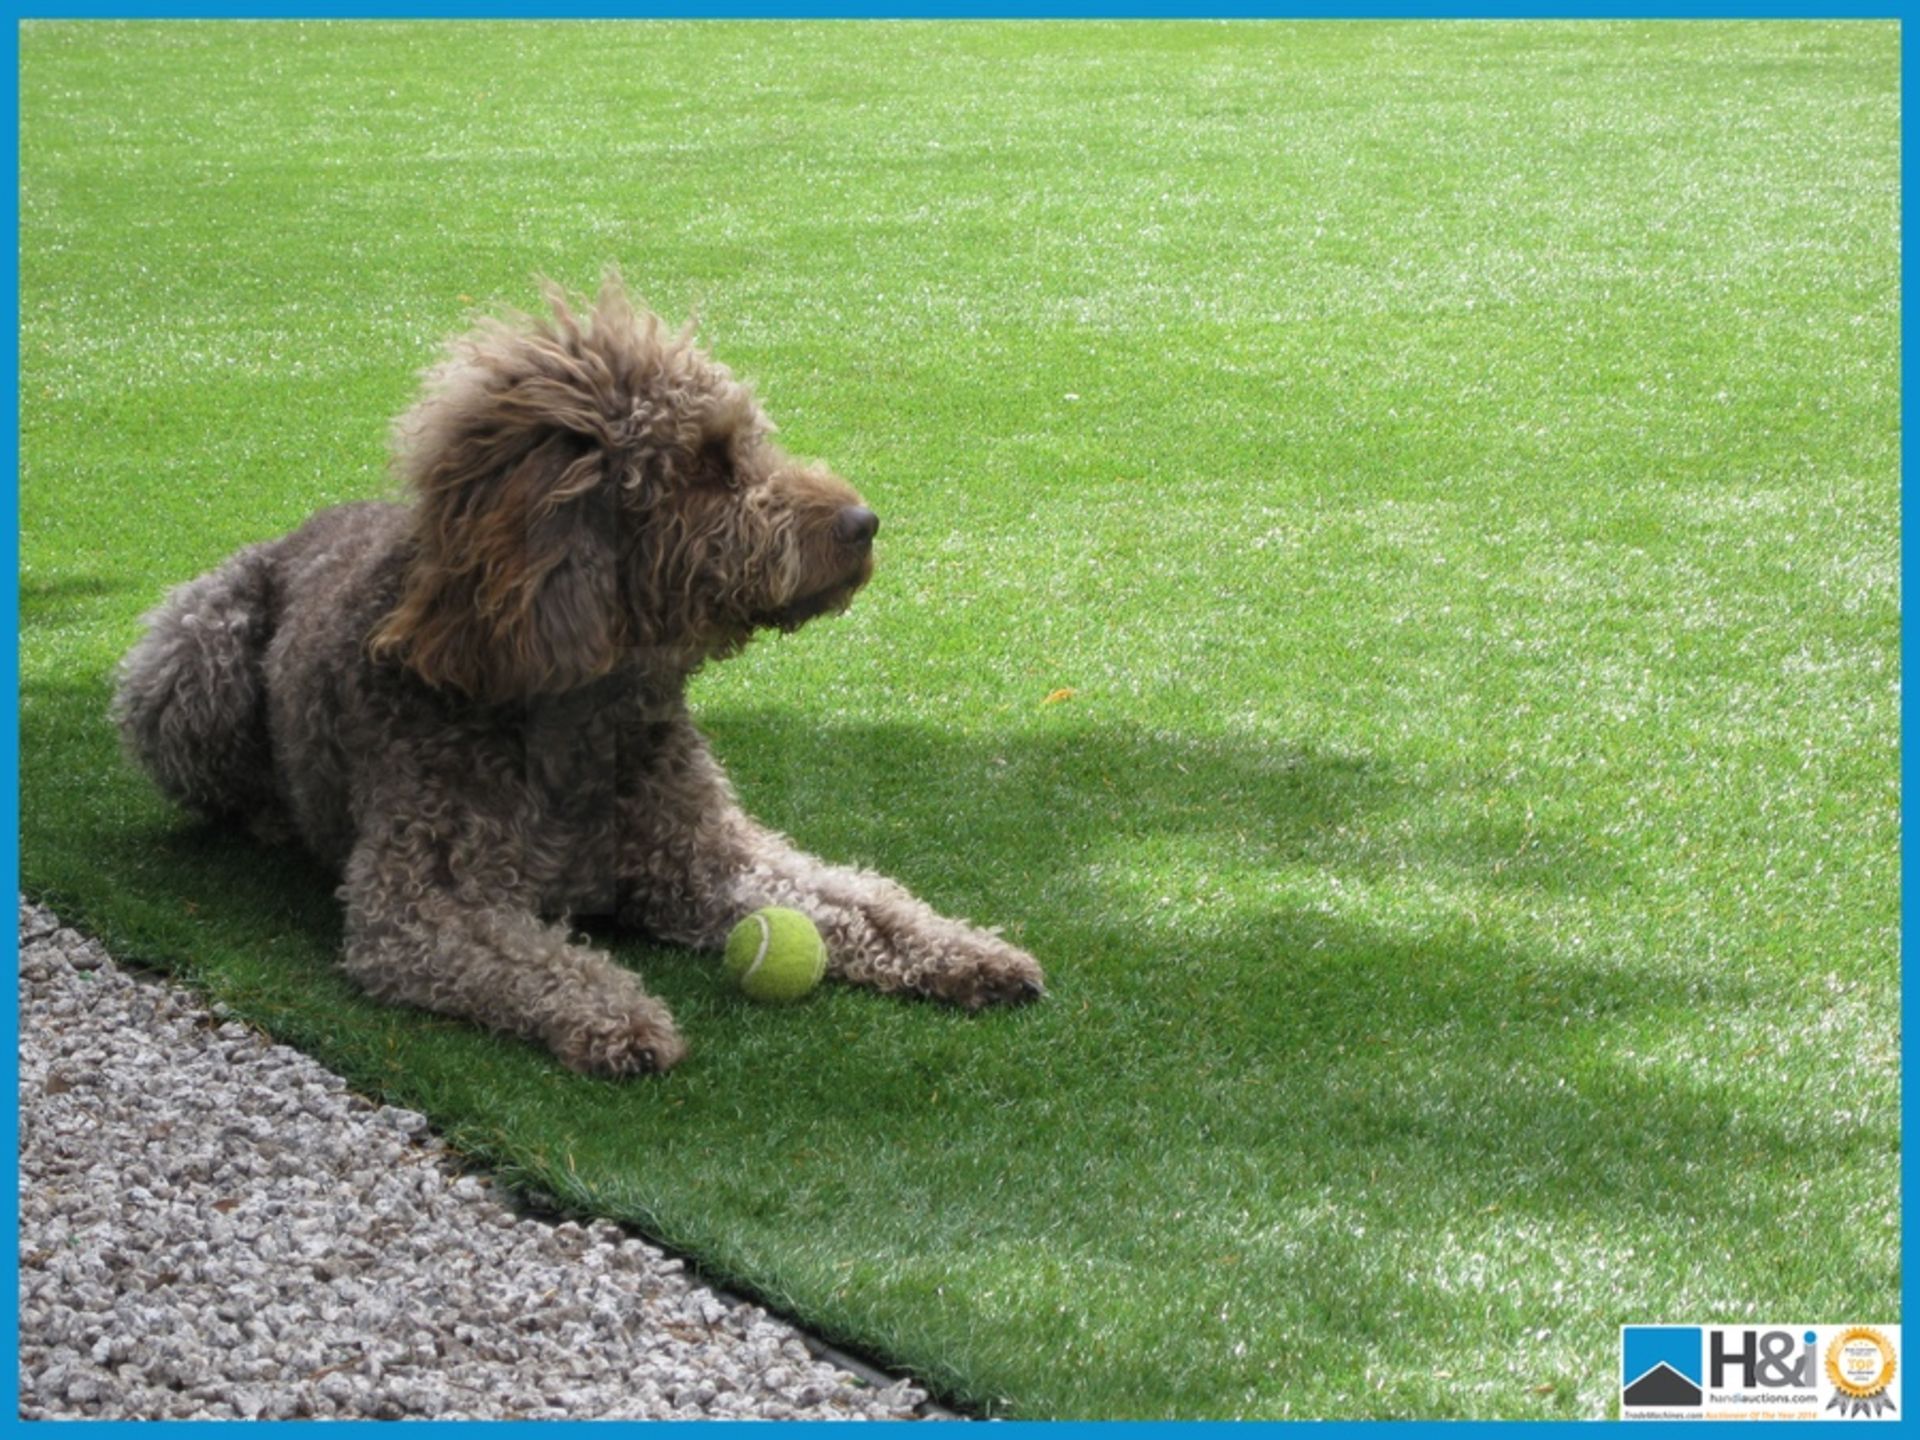 Ultra high-quality 'Woodthorpe' artificial grass. Useage applications, commercial and domestic, - Bild 3 aus 4